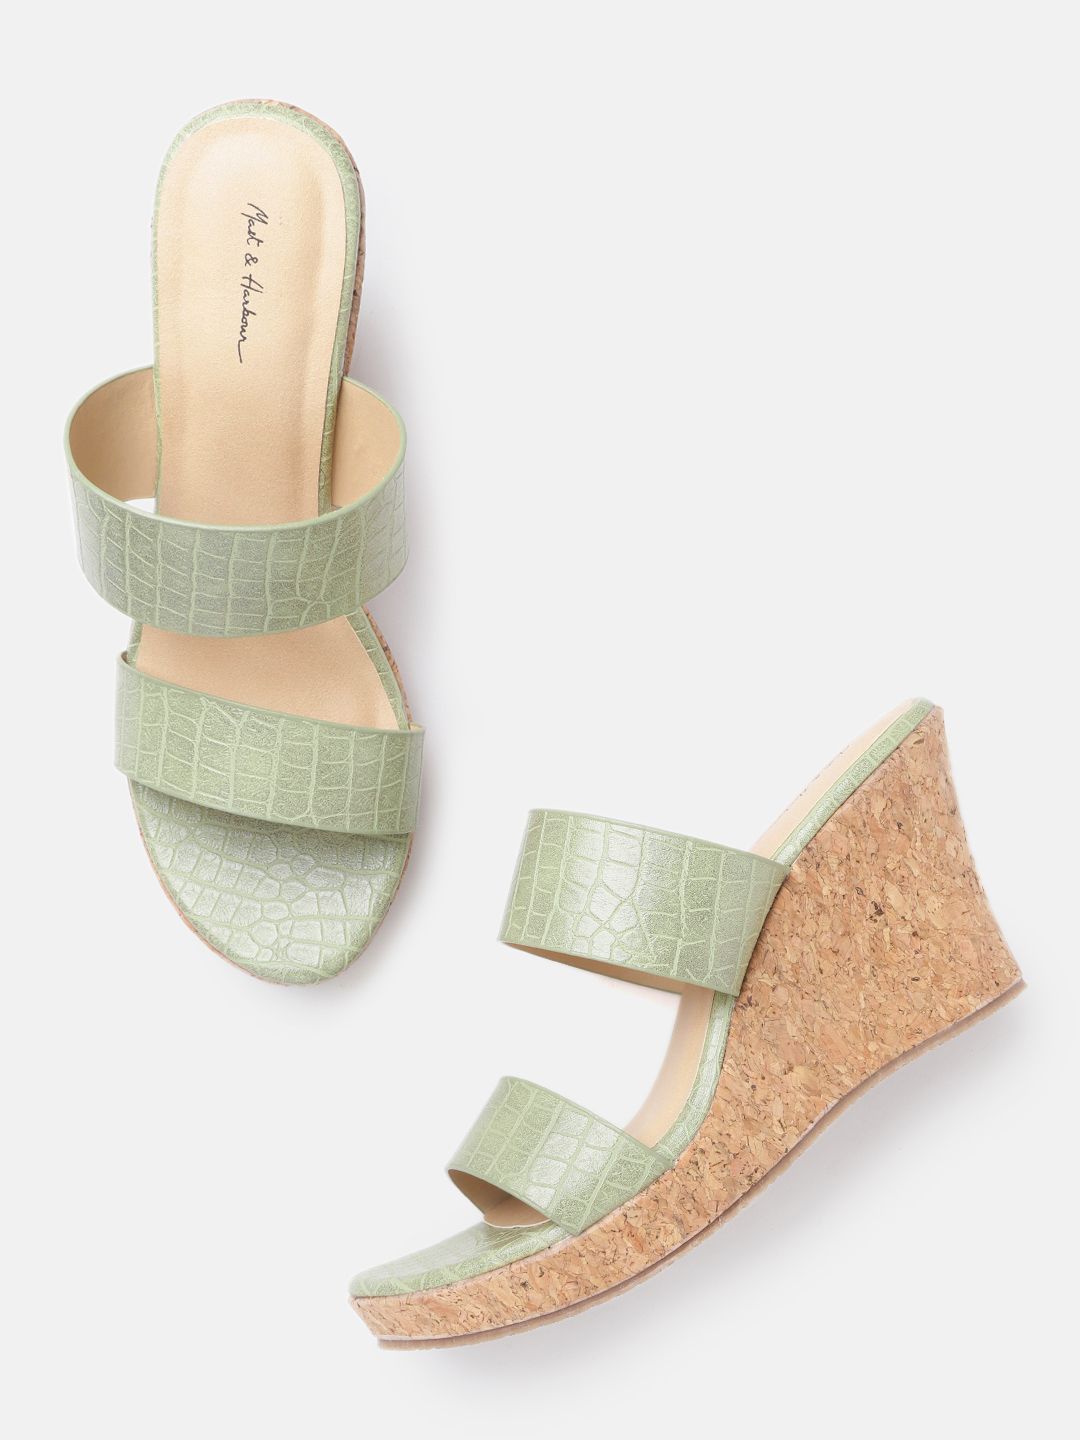 Mast & Harbour Olive Green Croc Textured Wedges Price in India